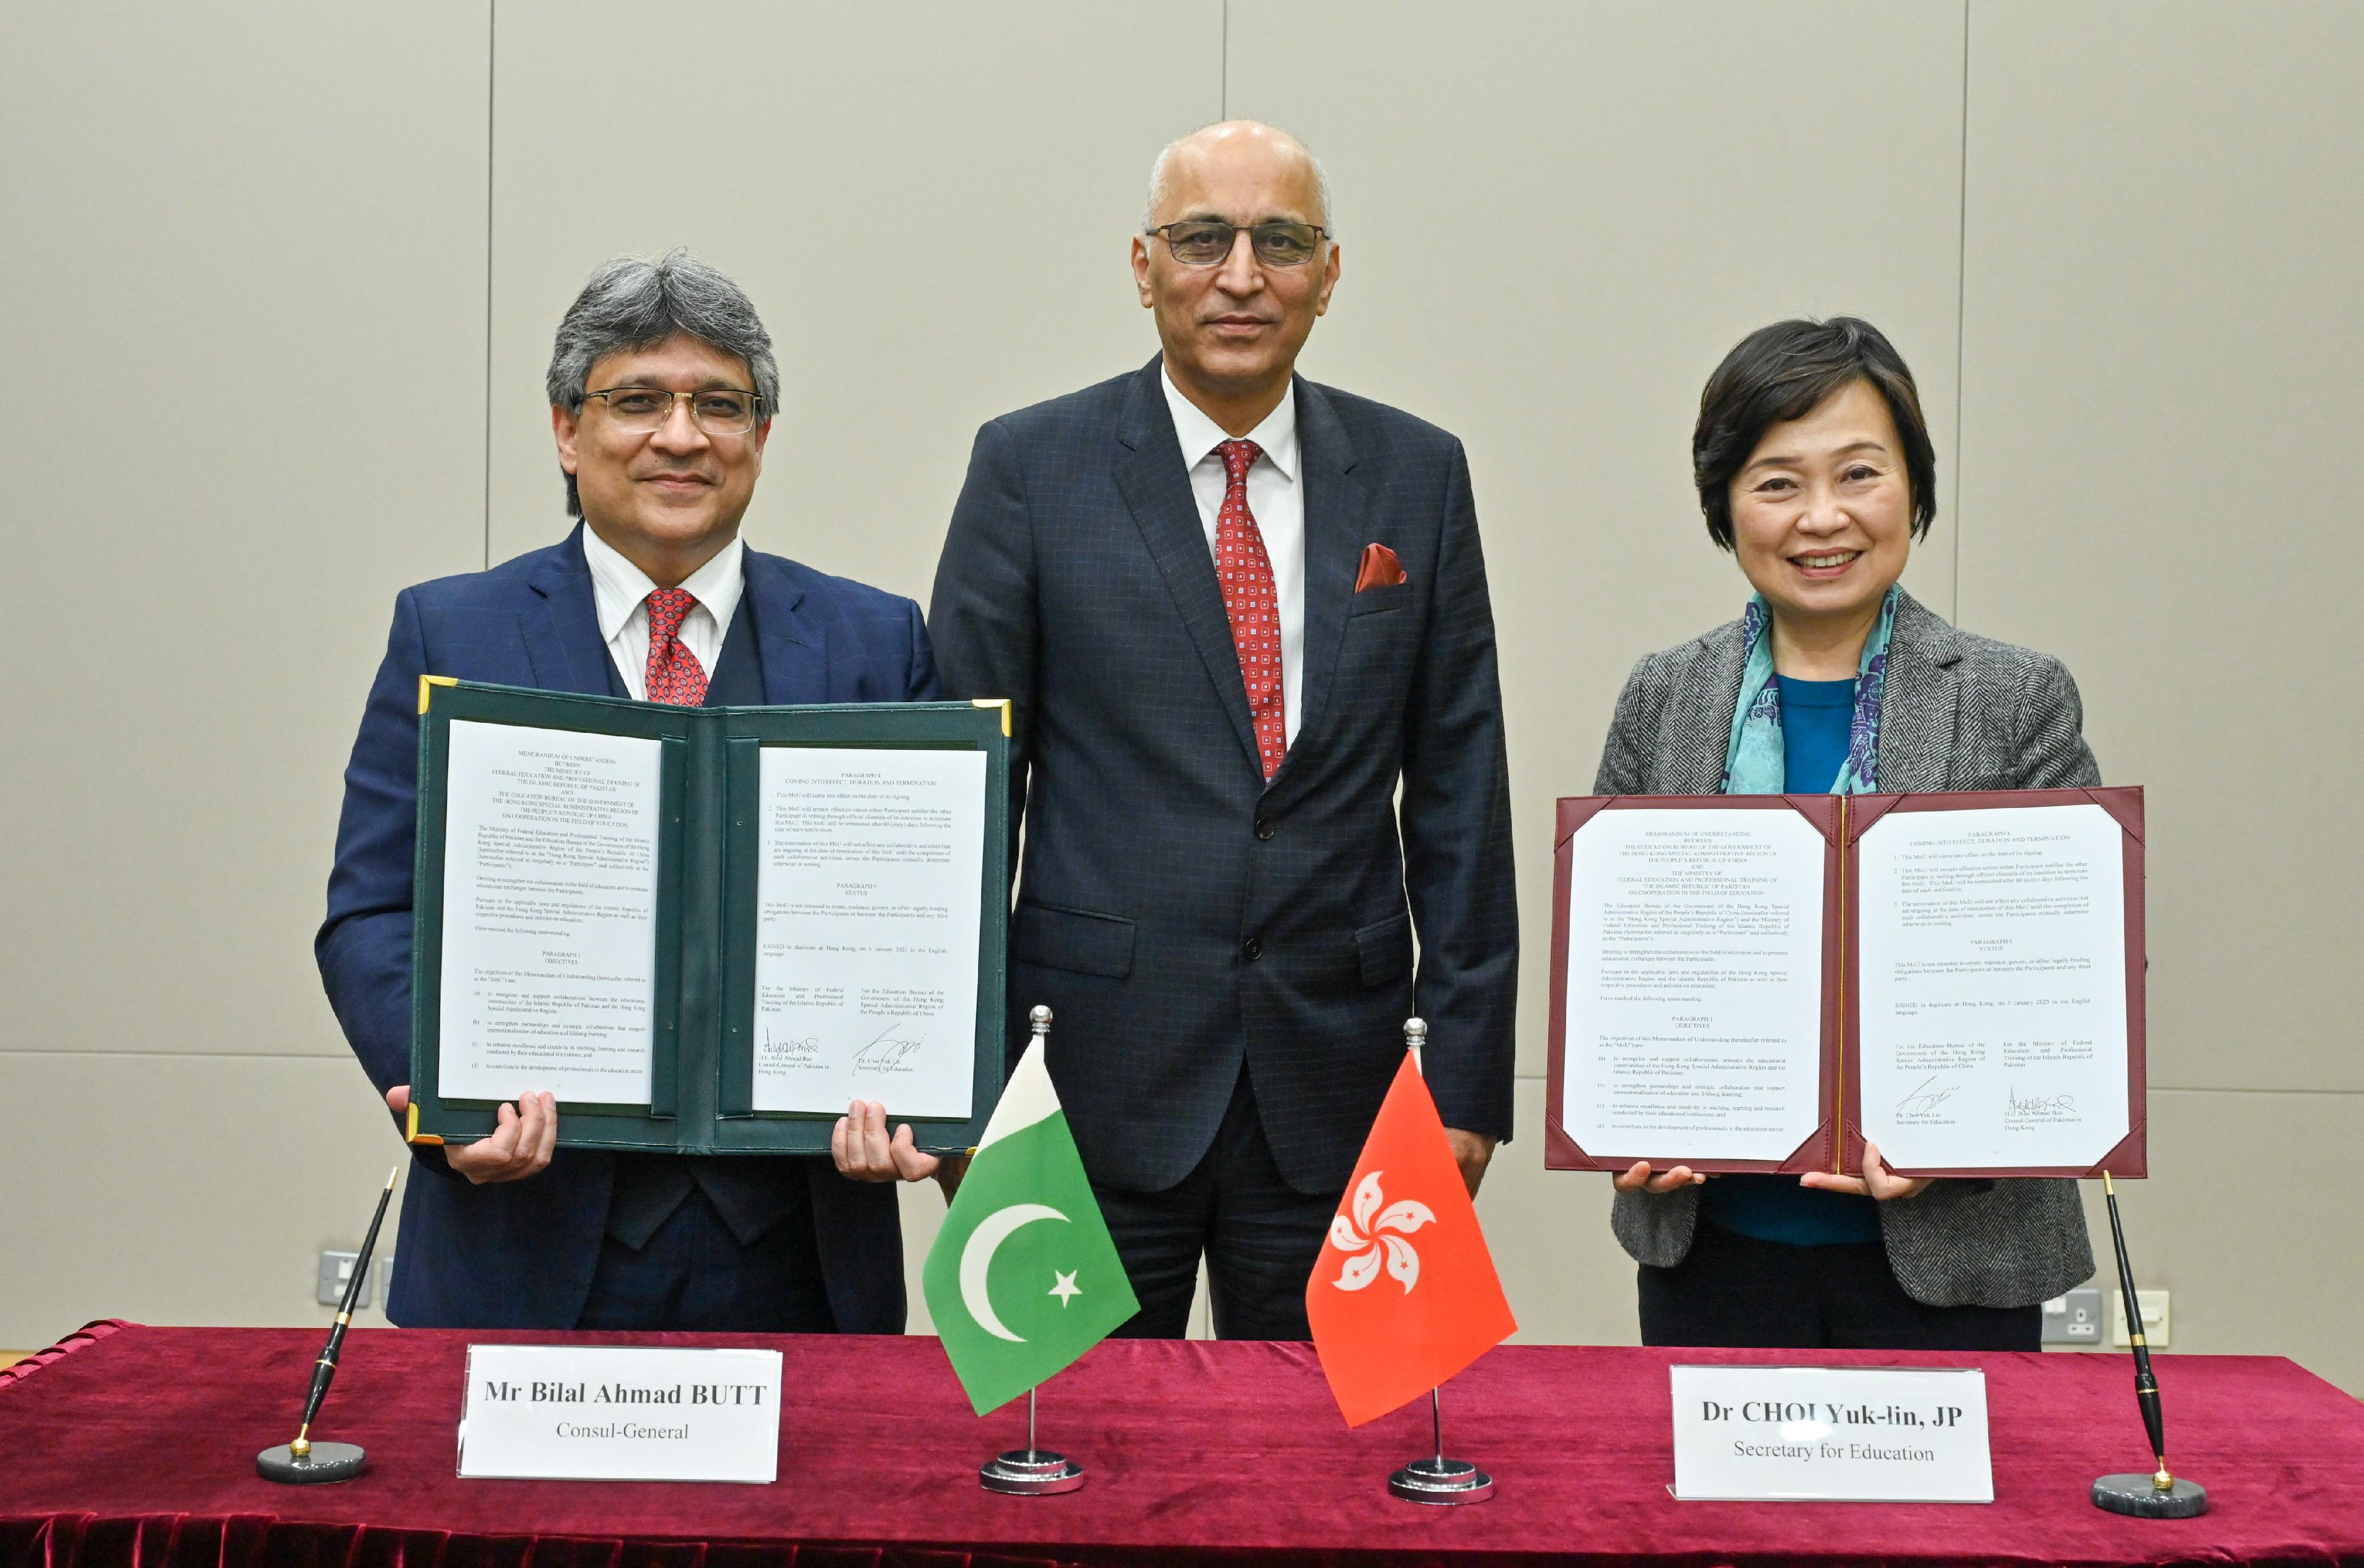 The Secretary for Education, Dr Choi Yuk-lin (right), is pictured with the Pakistani Ambassador to China, Mr Moin ul Haque (centre), and the Consul-General of Pakistan in Hong Kong, Mr Bilal Ahmad Butt (left), after the signing ceremony for the Memorandum of Understanding on education co-operation today (January 5).